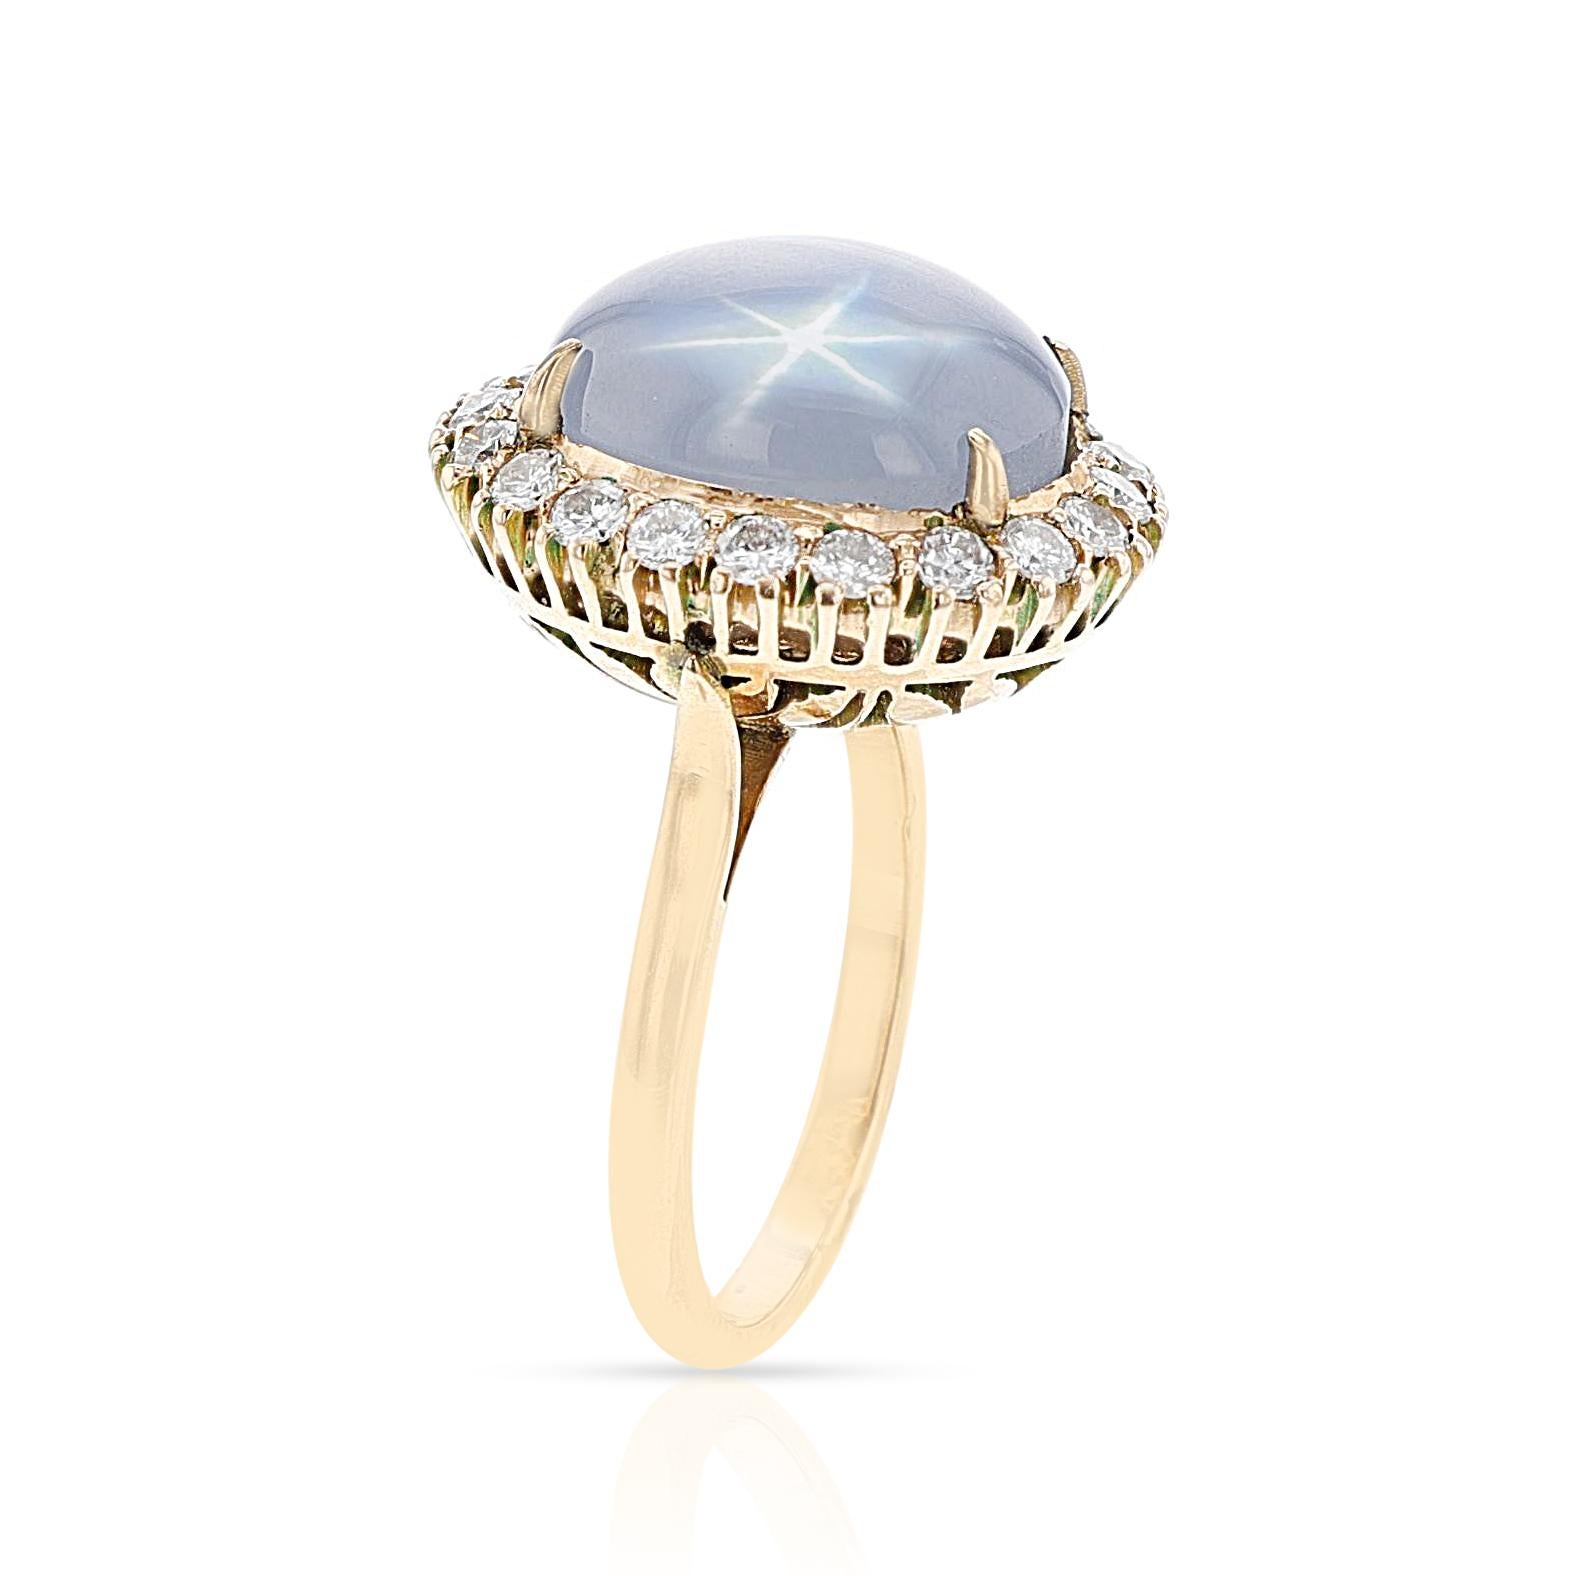 A Star Sapphire Cabochon and Diamond Halo Ring made in gold. The ring weighs 8.42 grams. The Ring Size is US 6.50. 

SKU: 1532